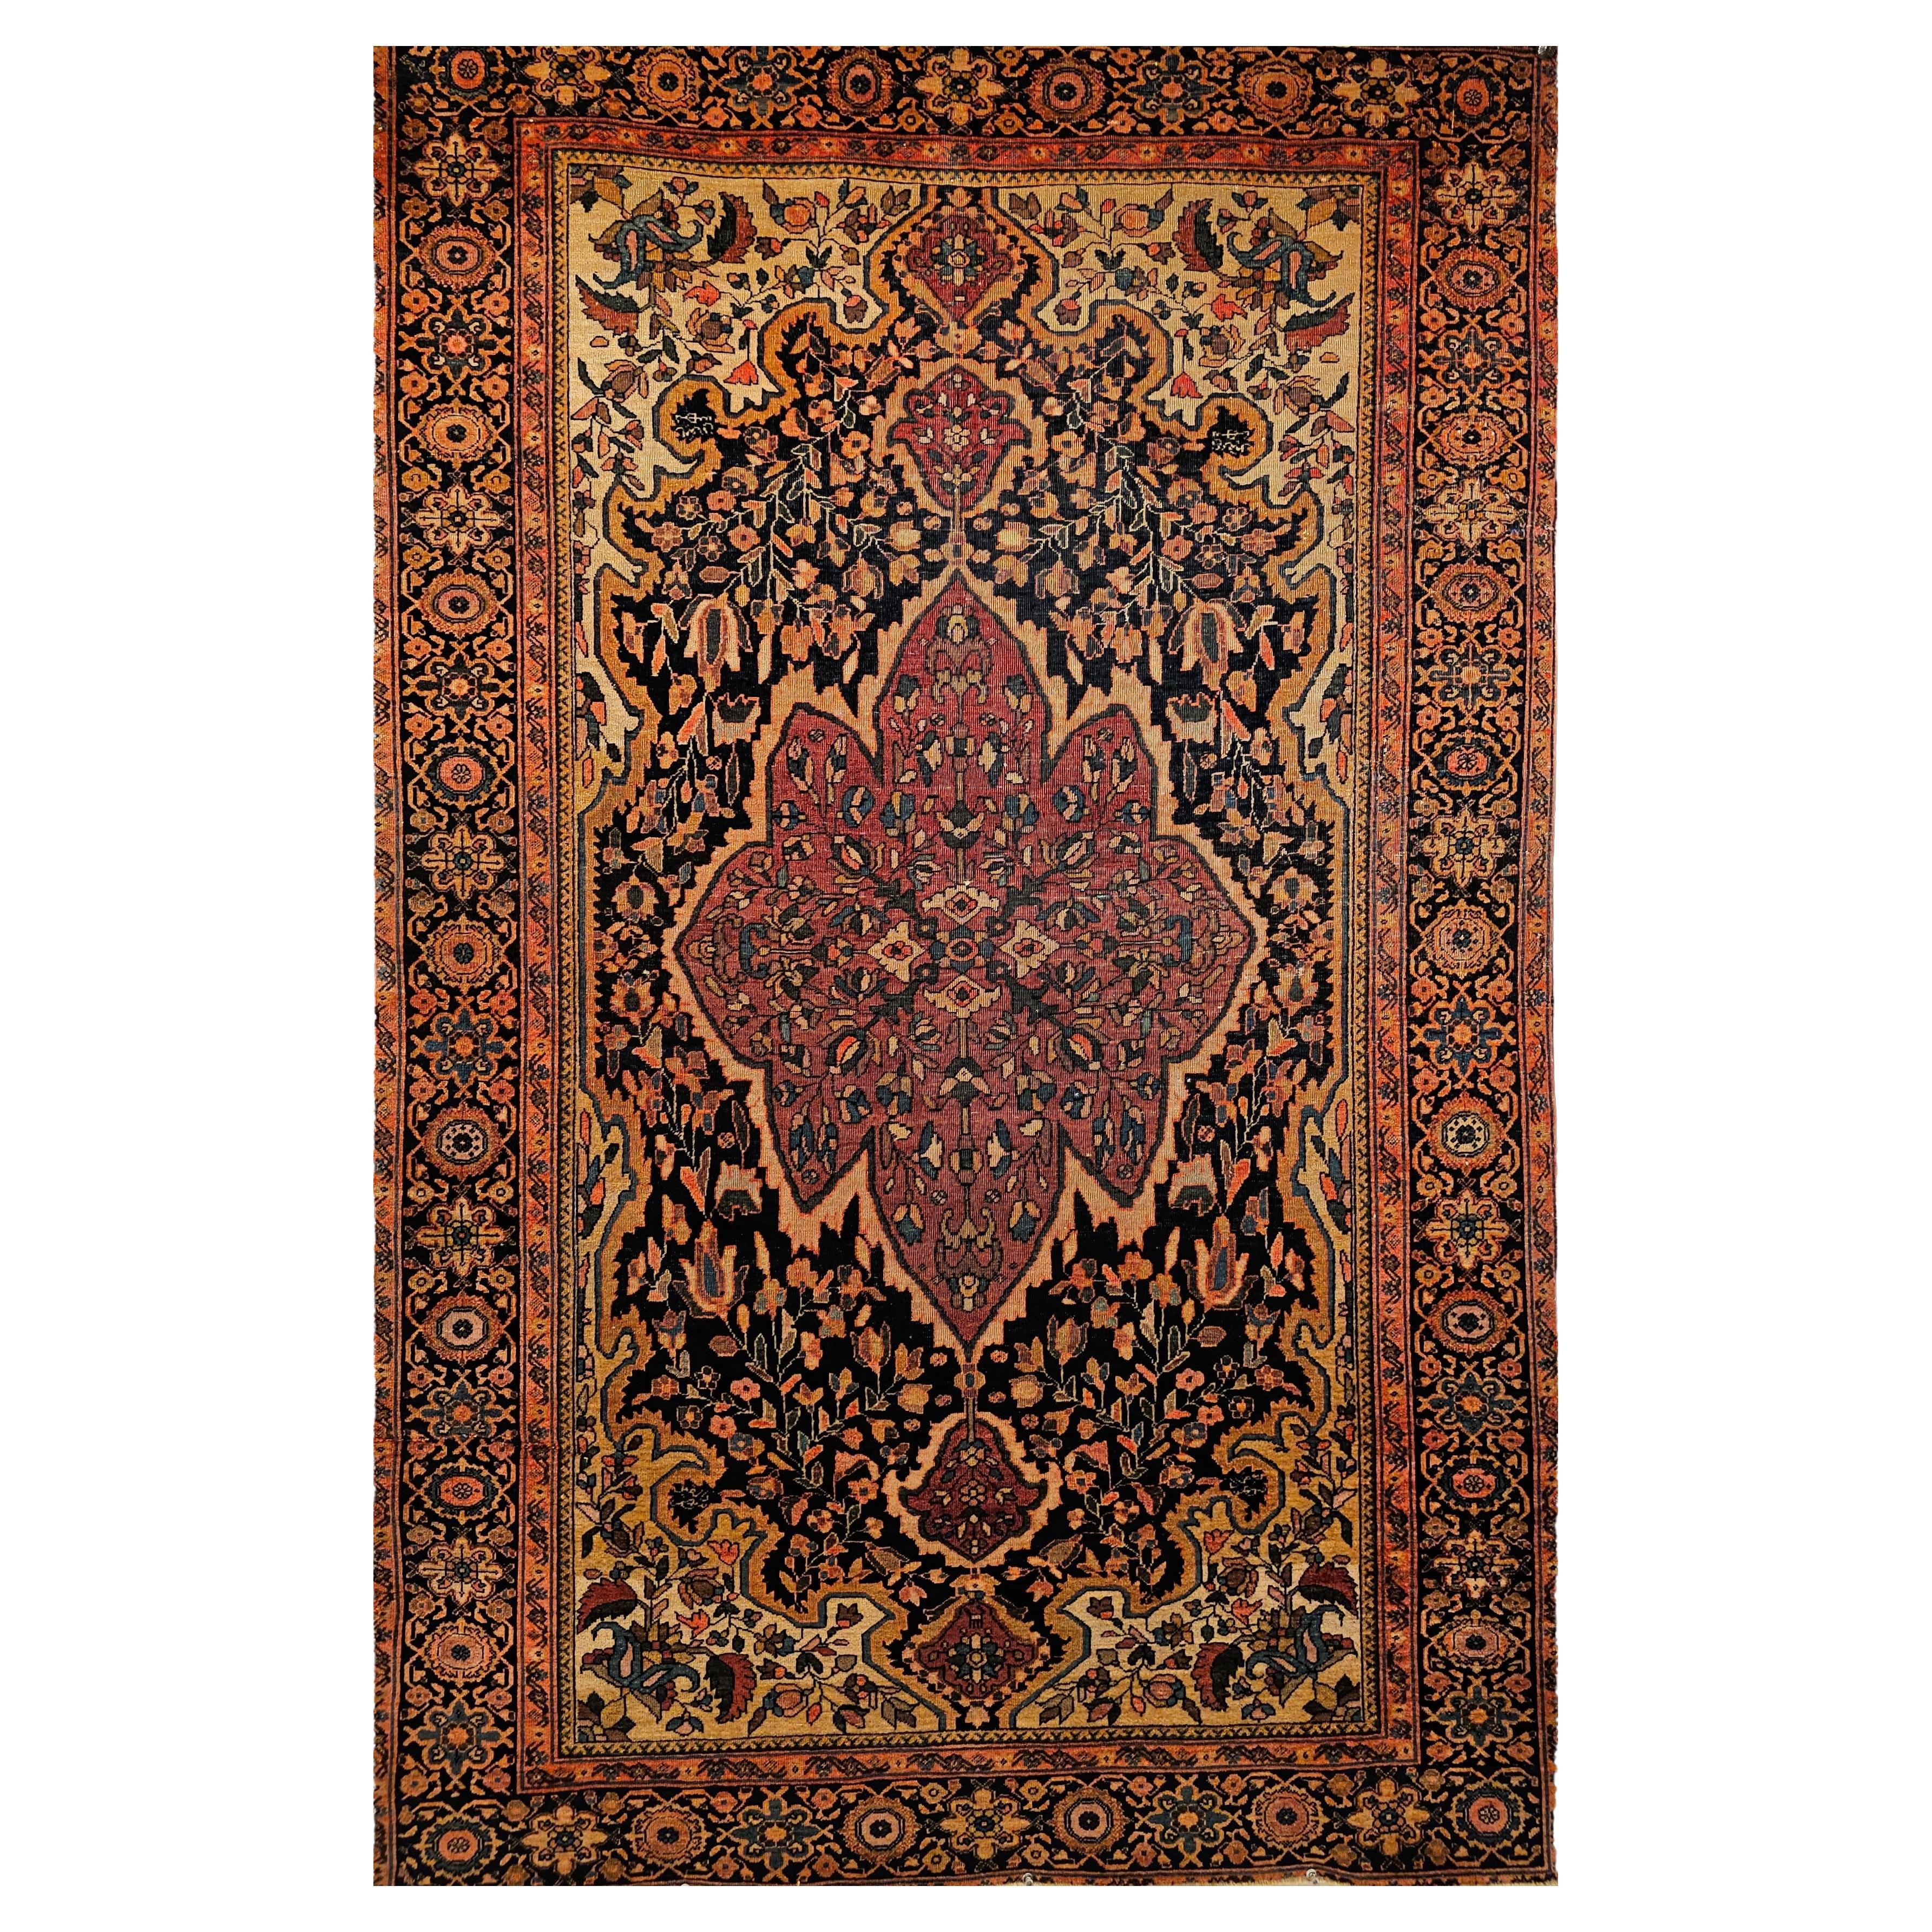 19th Century Persian Farahan Area Rug in Floral Pattern in Navy Blue, Plum Red